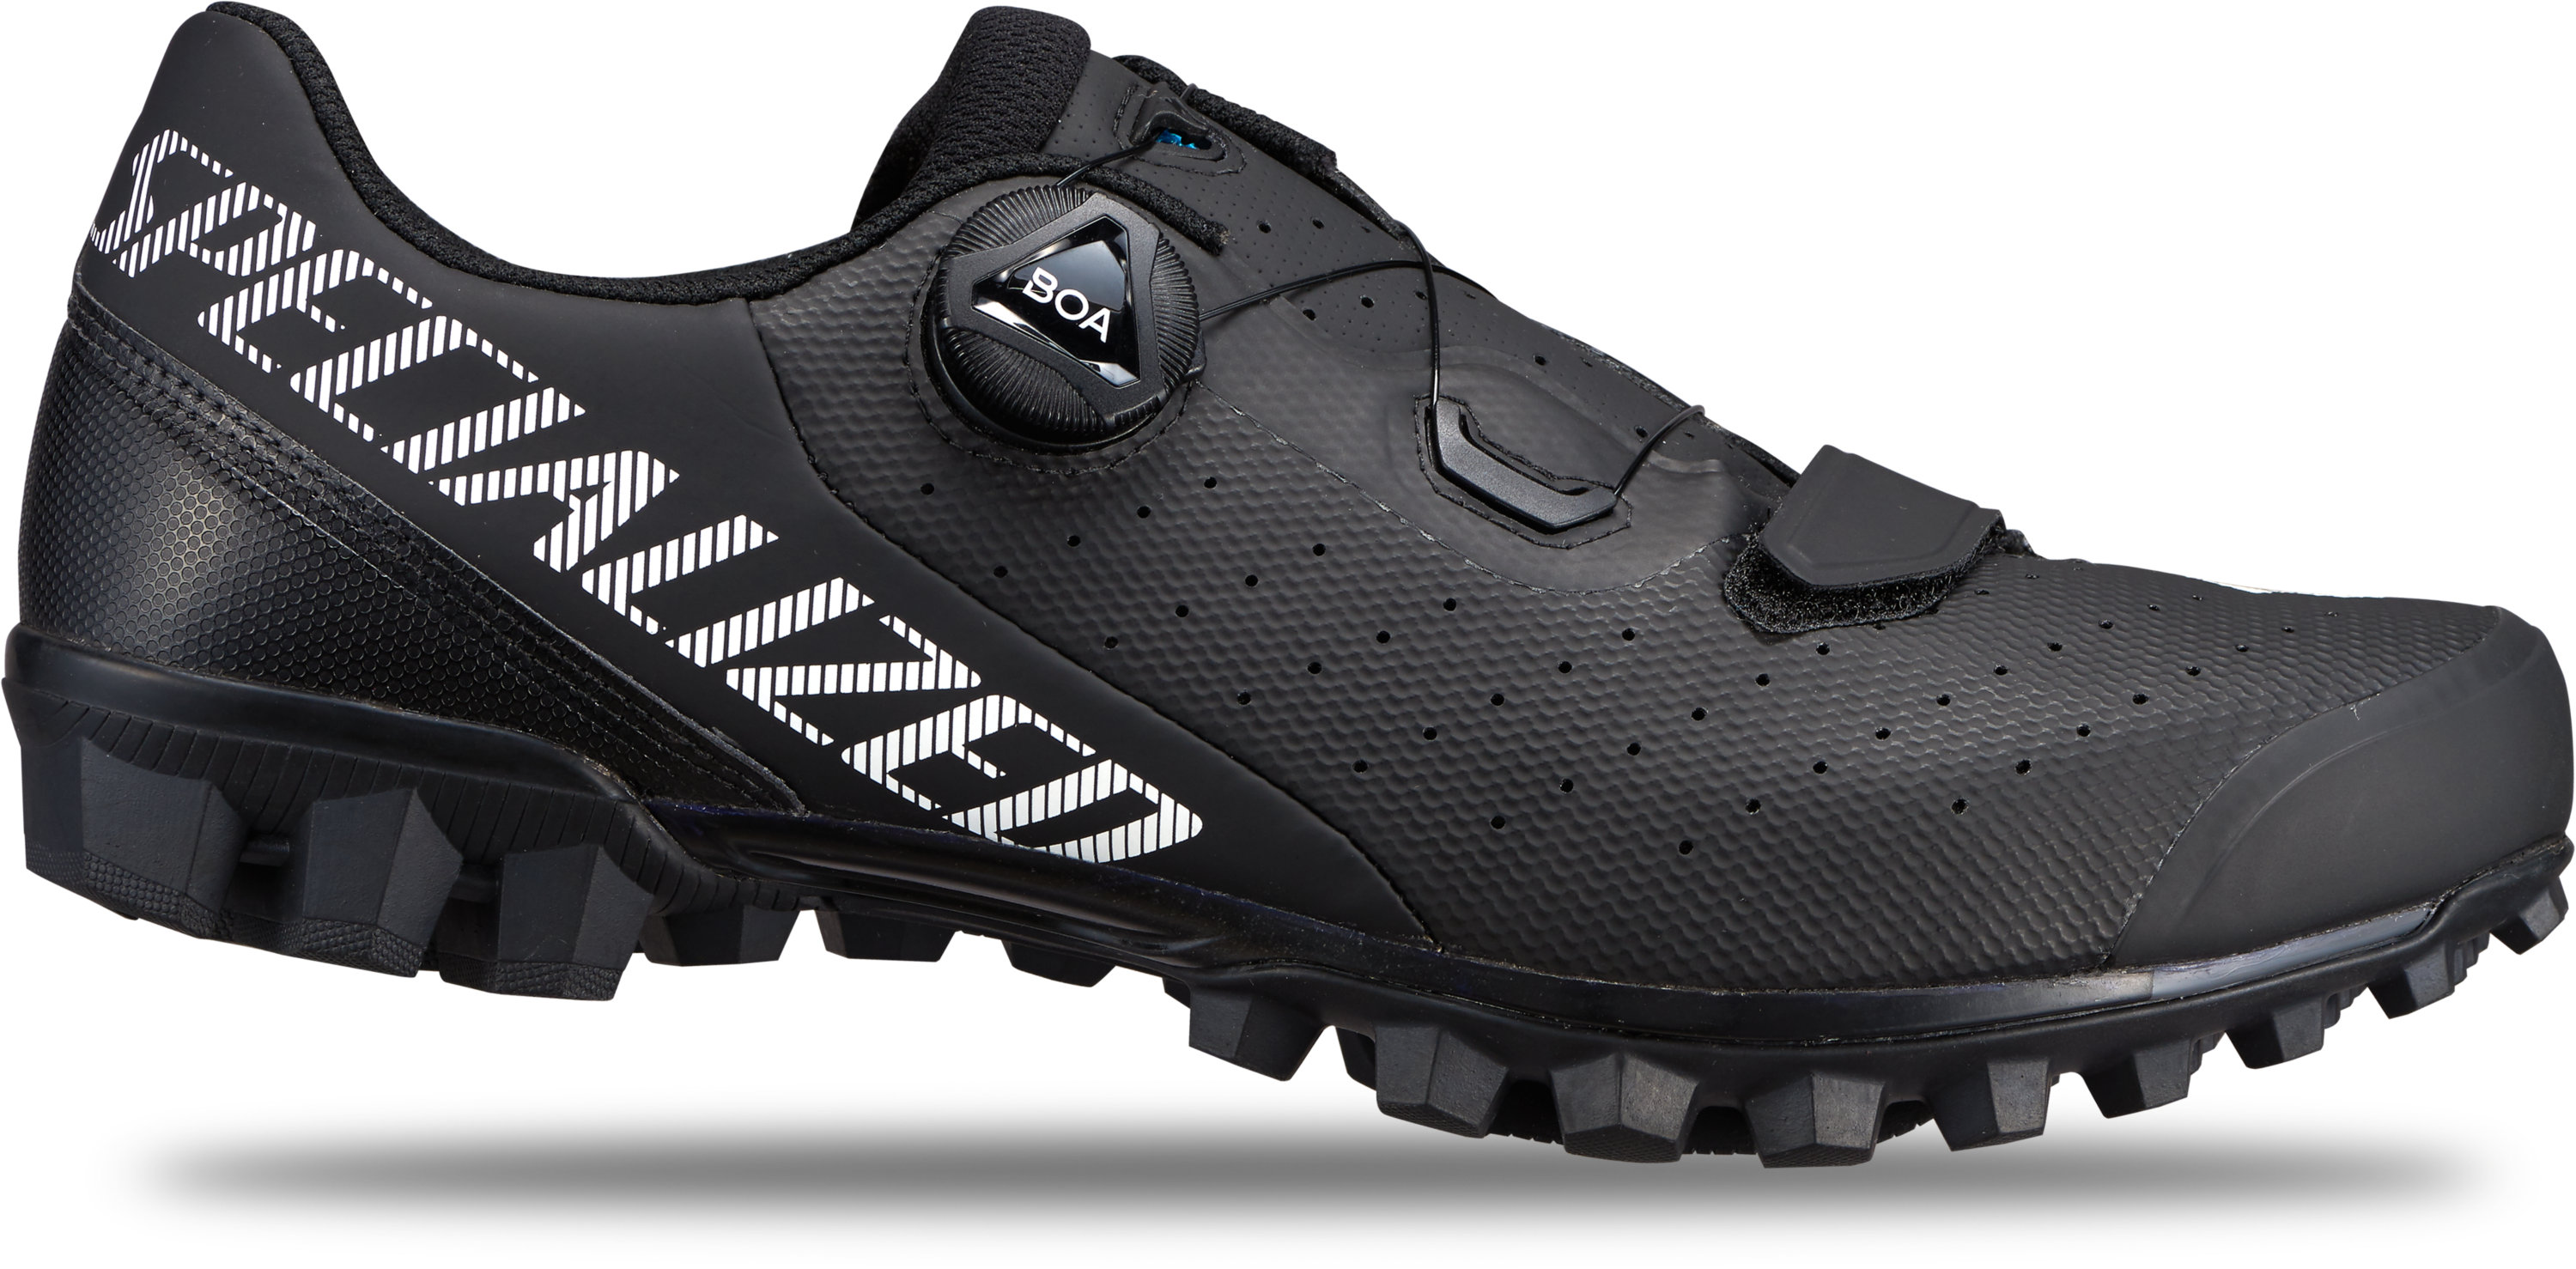 specialized recon 2.0 mtb shoe